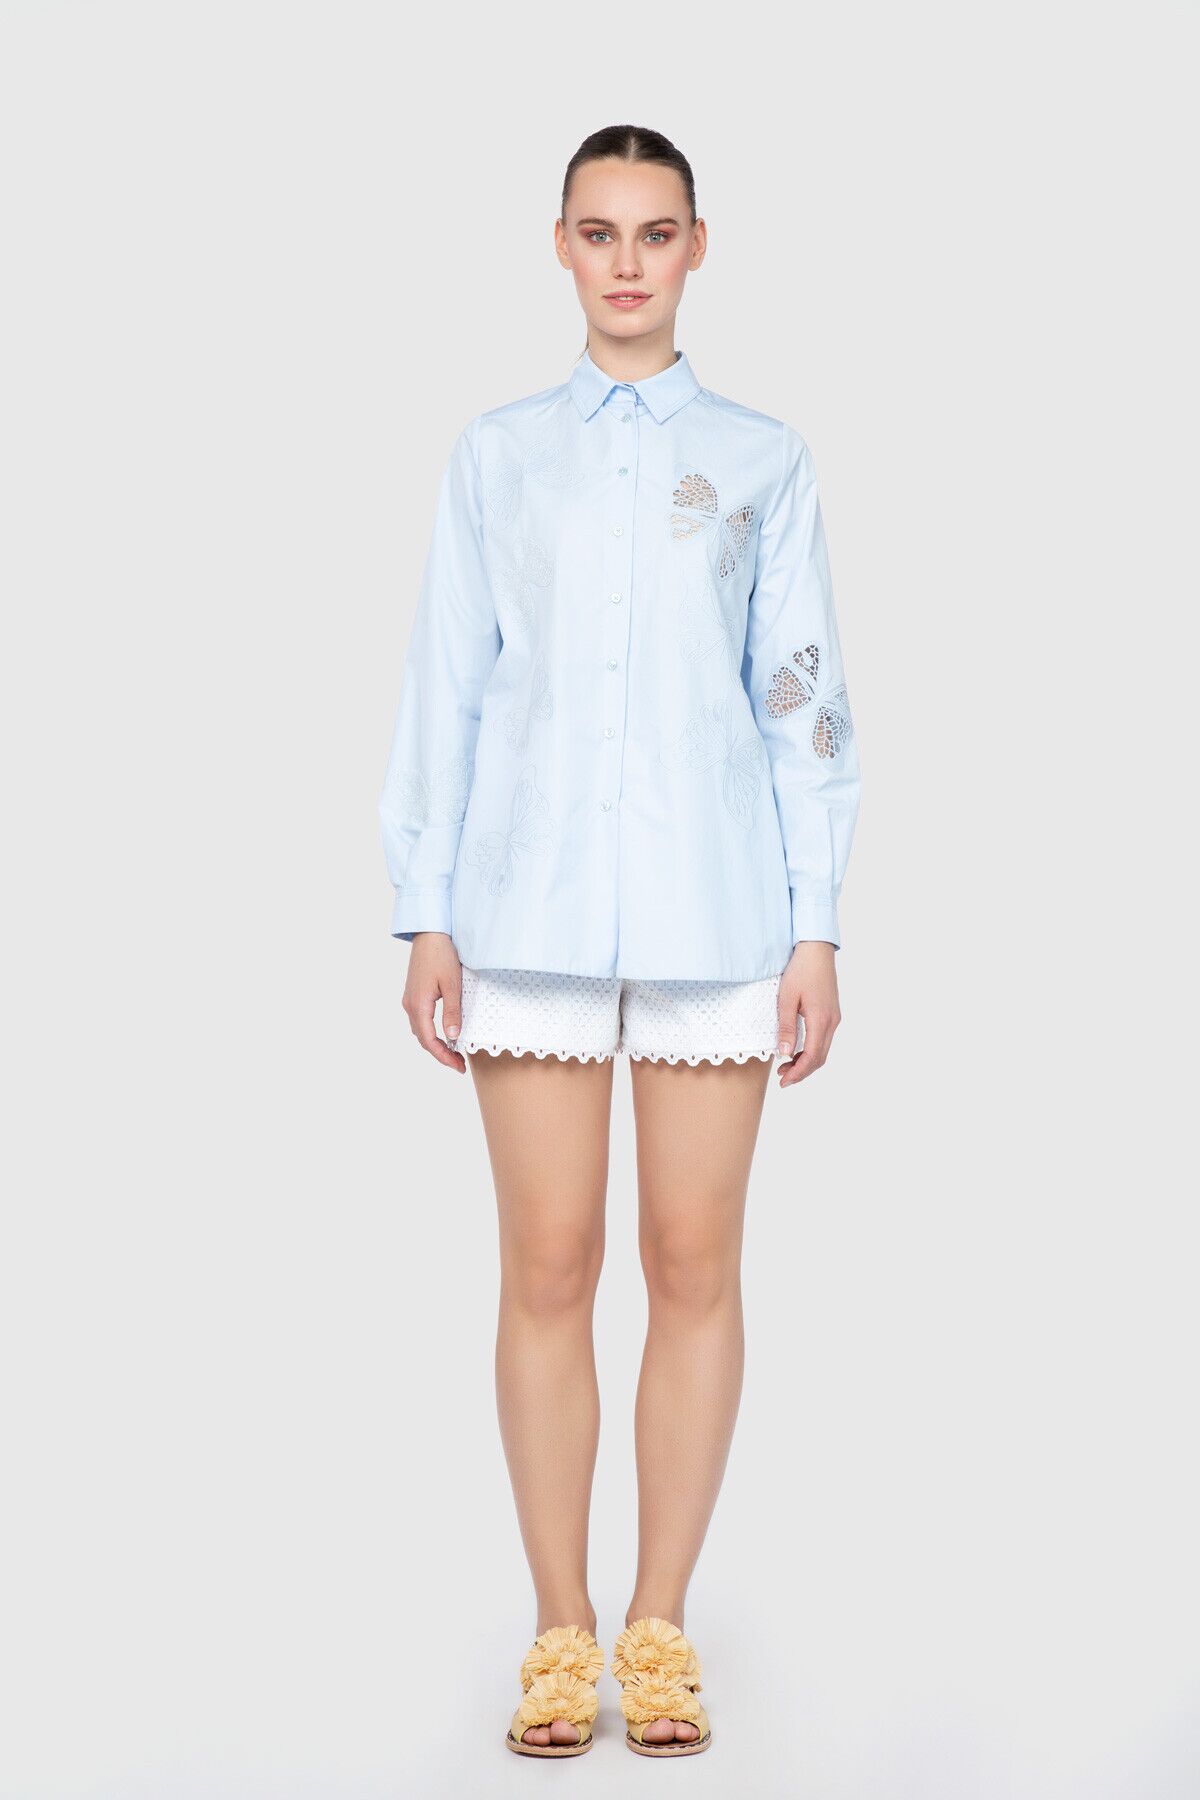 GIZIAGATE - Transparent Embroidery Detailed Blue Shirt